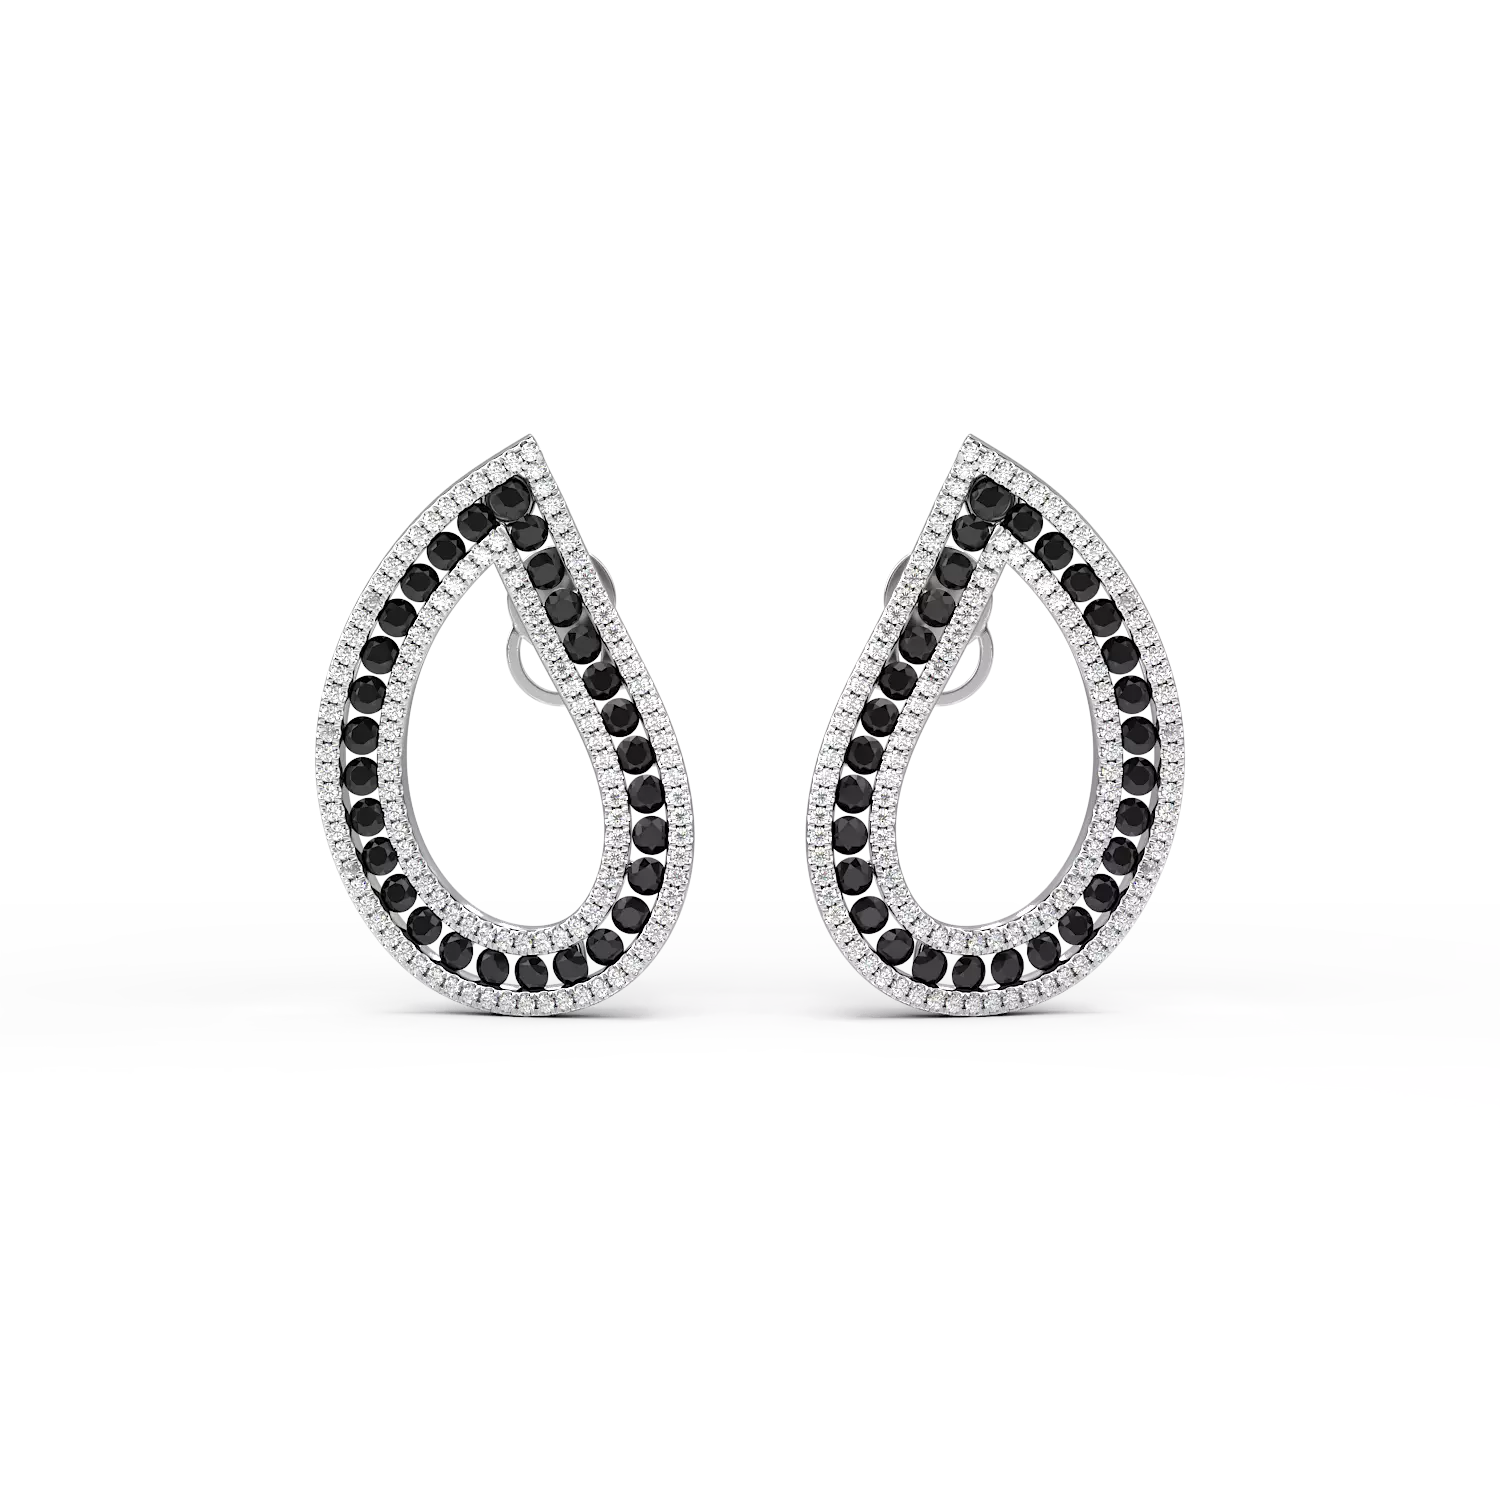 White gold earrings with 1.82ct black diamonds and 0.62ct clear diamonds